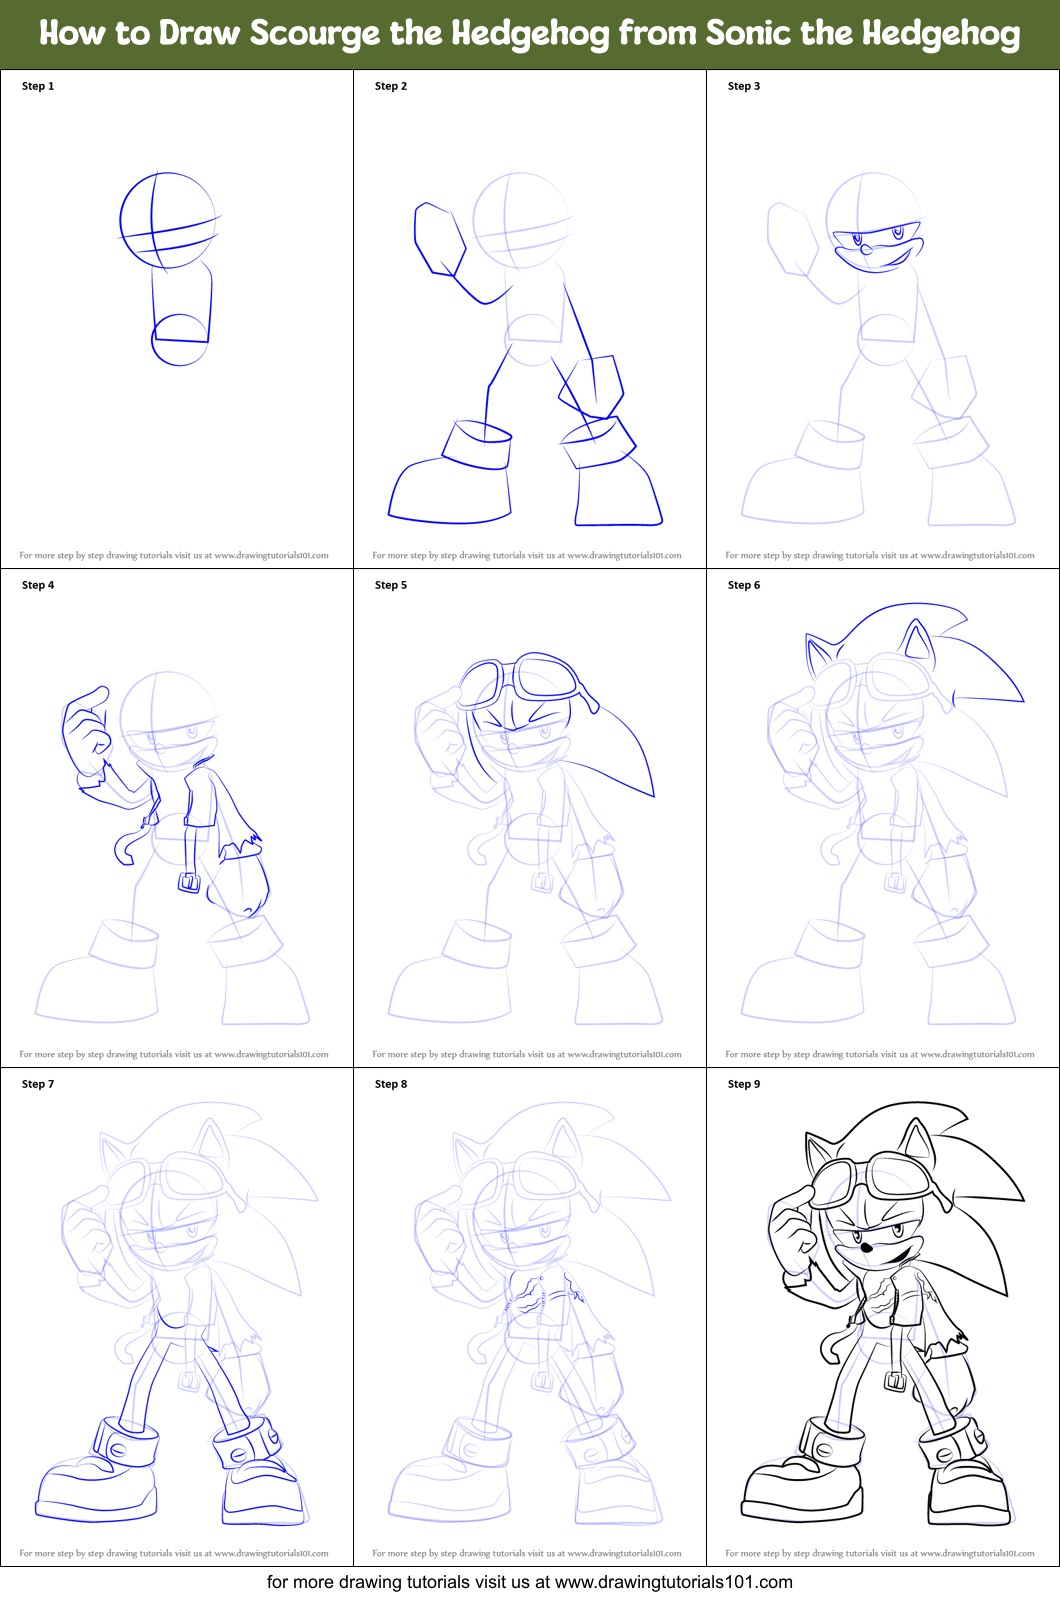 How to Draw Scourge the Hedgehog from Sonic the Hedgehog printable step